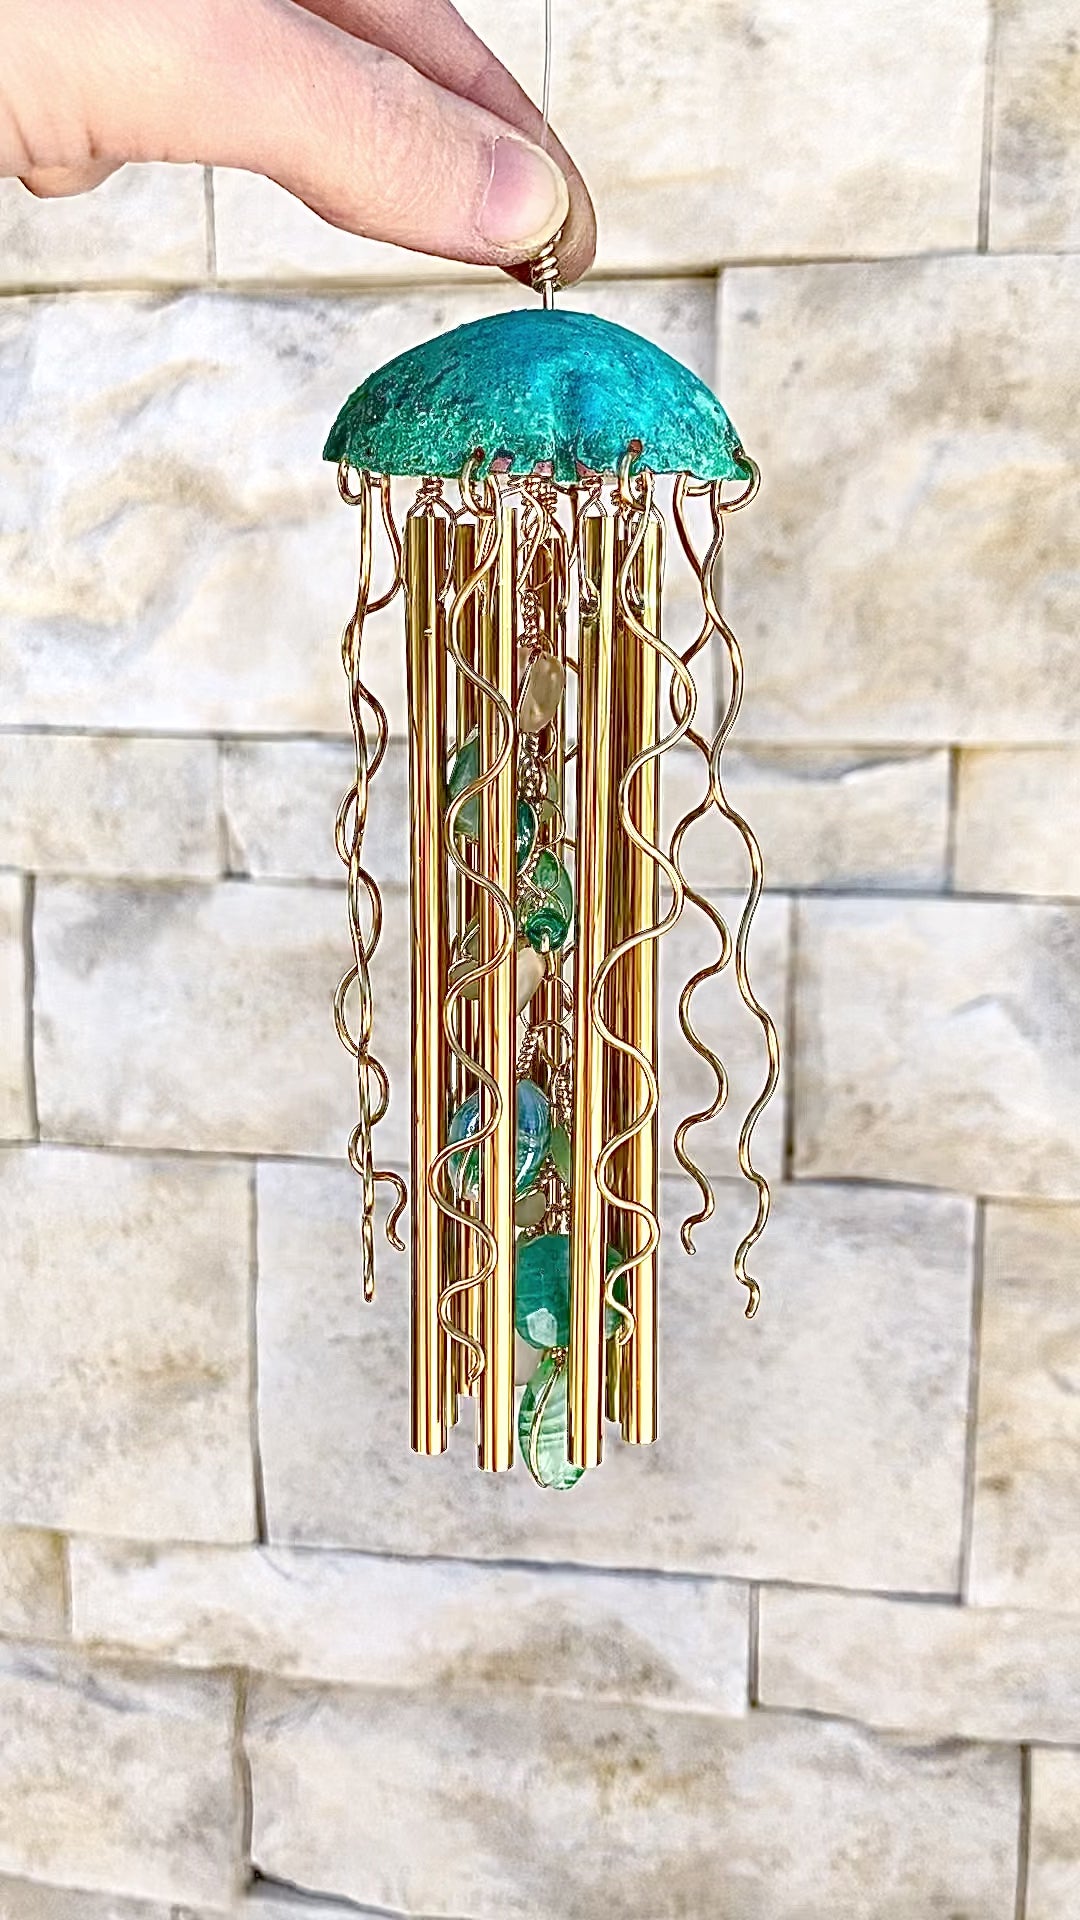 Buy glass wind chime Online in Barbados at Low Prices at desertcart